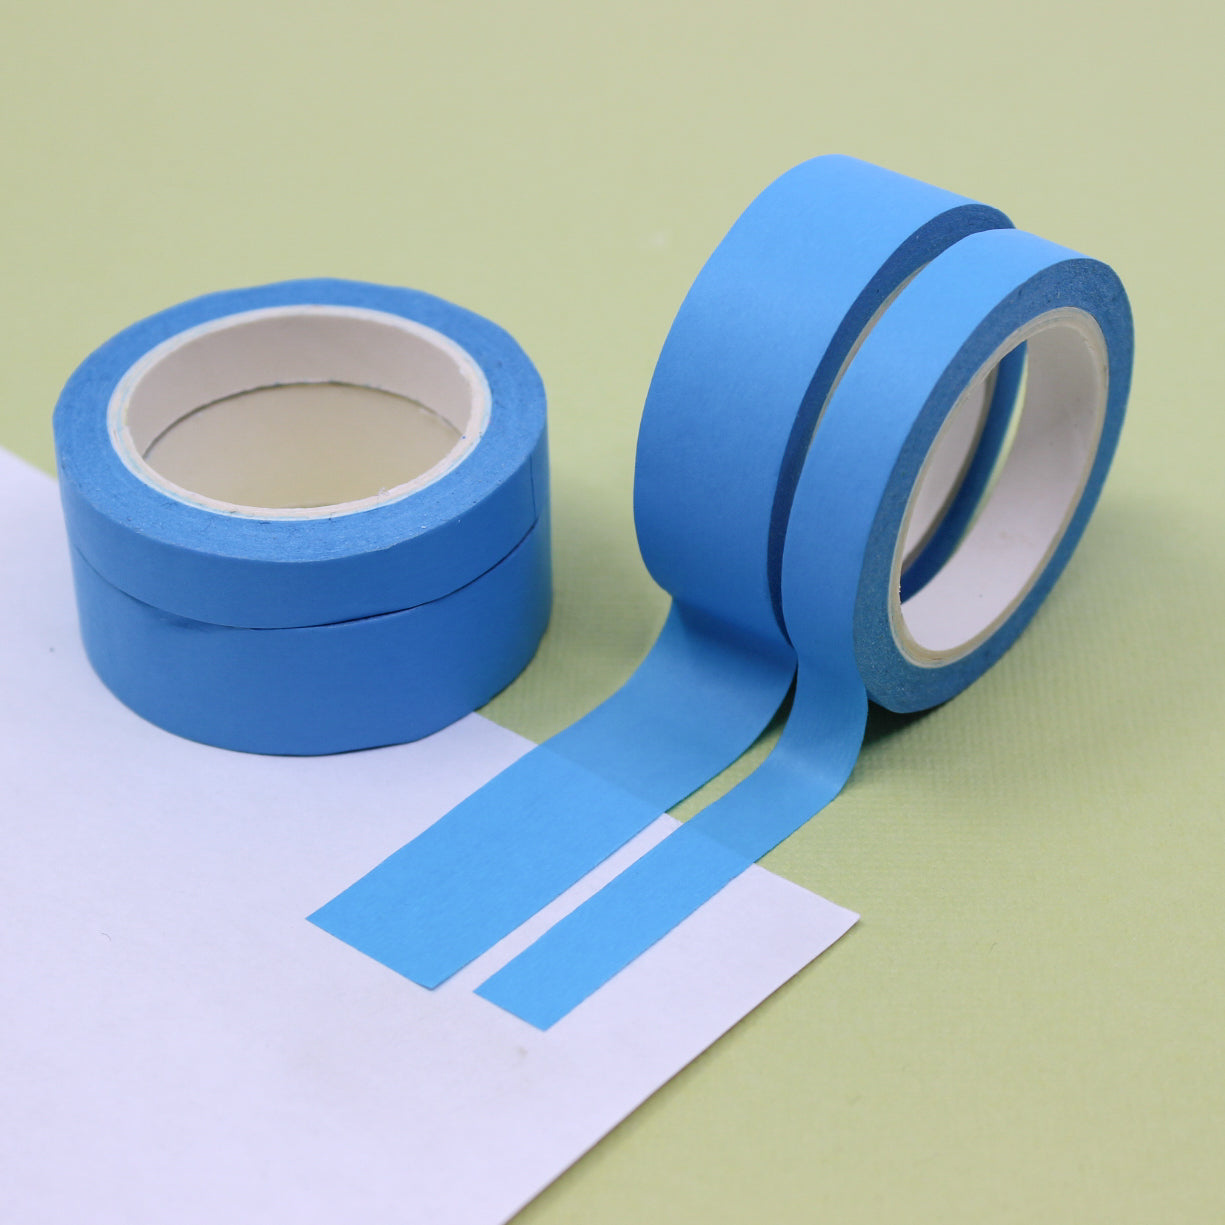 This neon blue washi tape is vibrant and fun. This washi tape is part of our solid neon thick-thin matching duo washi collection. Find the perfect color for any project in BBB Supplies' thick-thin solids collection from neon to neutral to pastel and more.